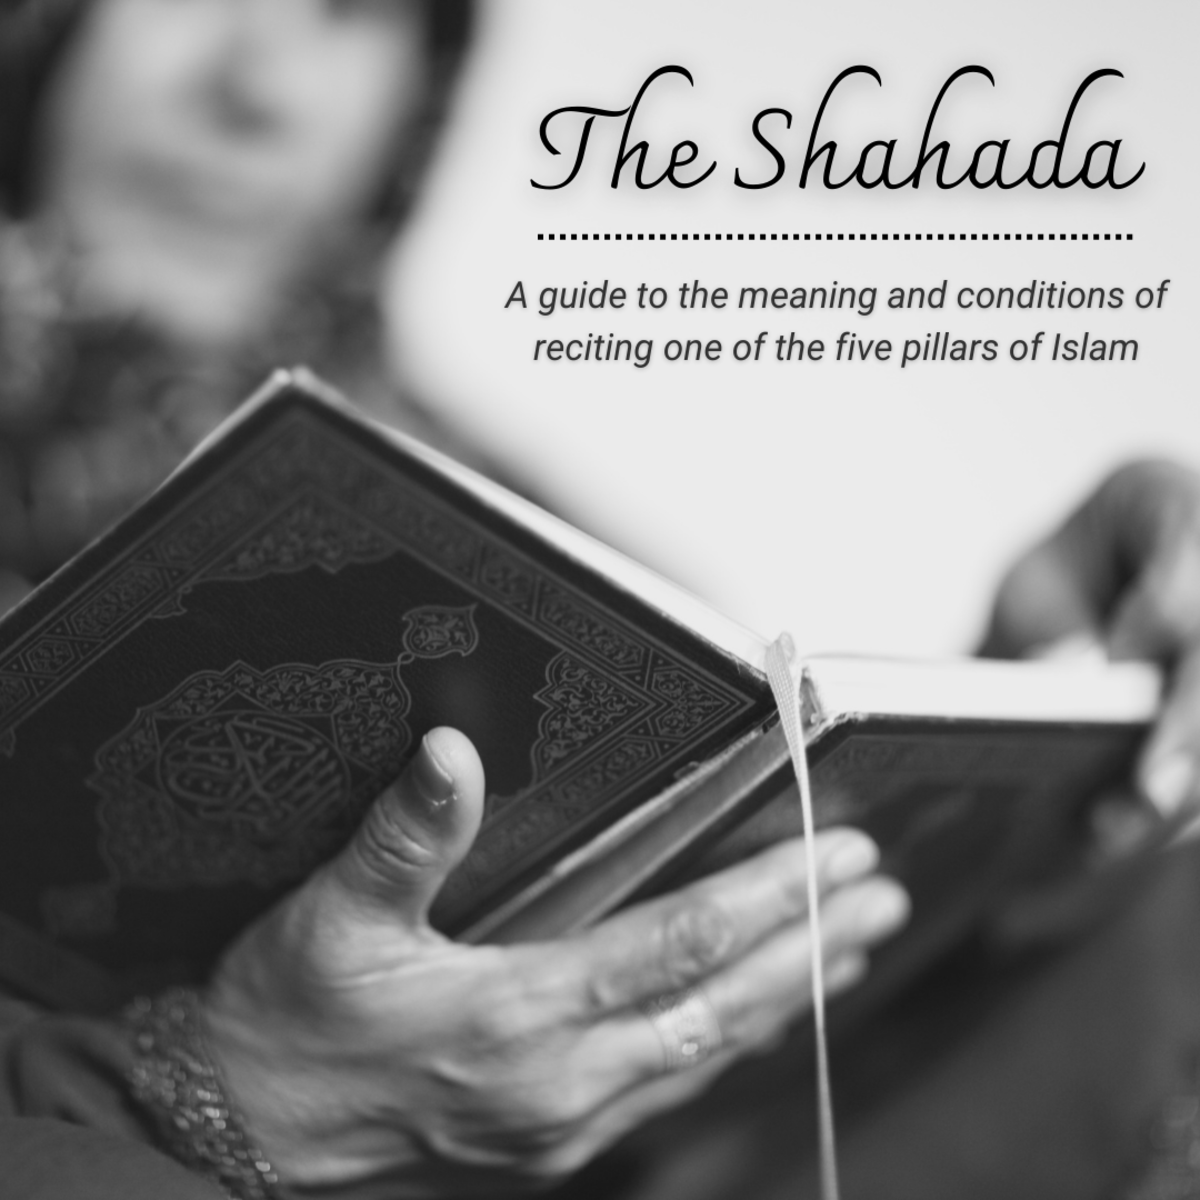 This article explains the conditions of the shahada. Because the Qu'ran states that there is no compulsory in religion, it is important to understand fully what the shahada really implies.